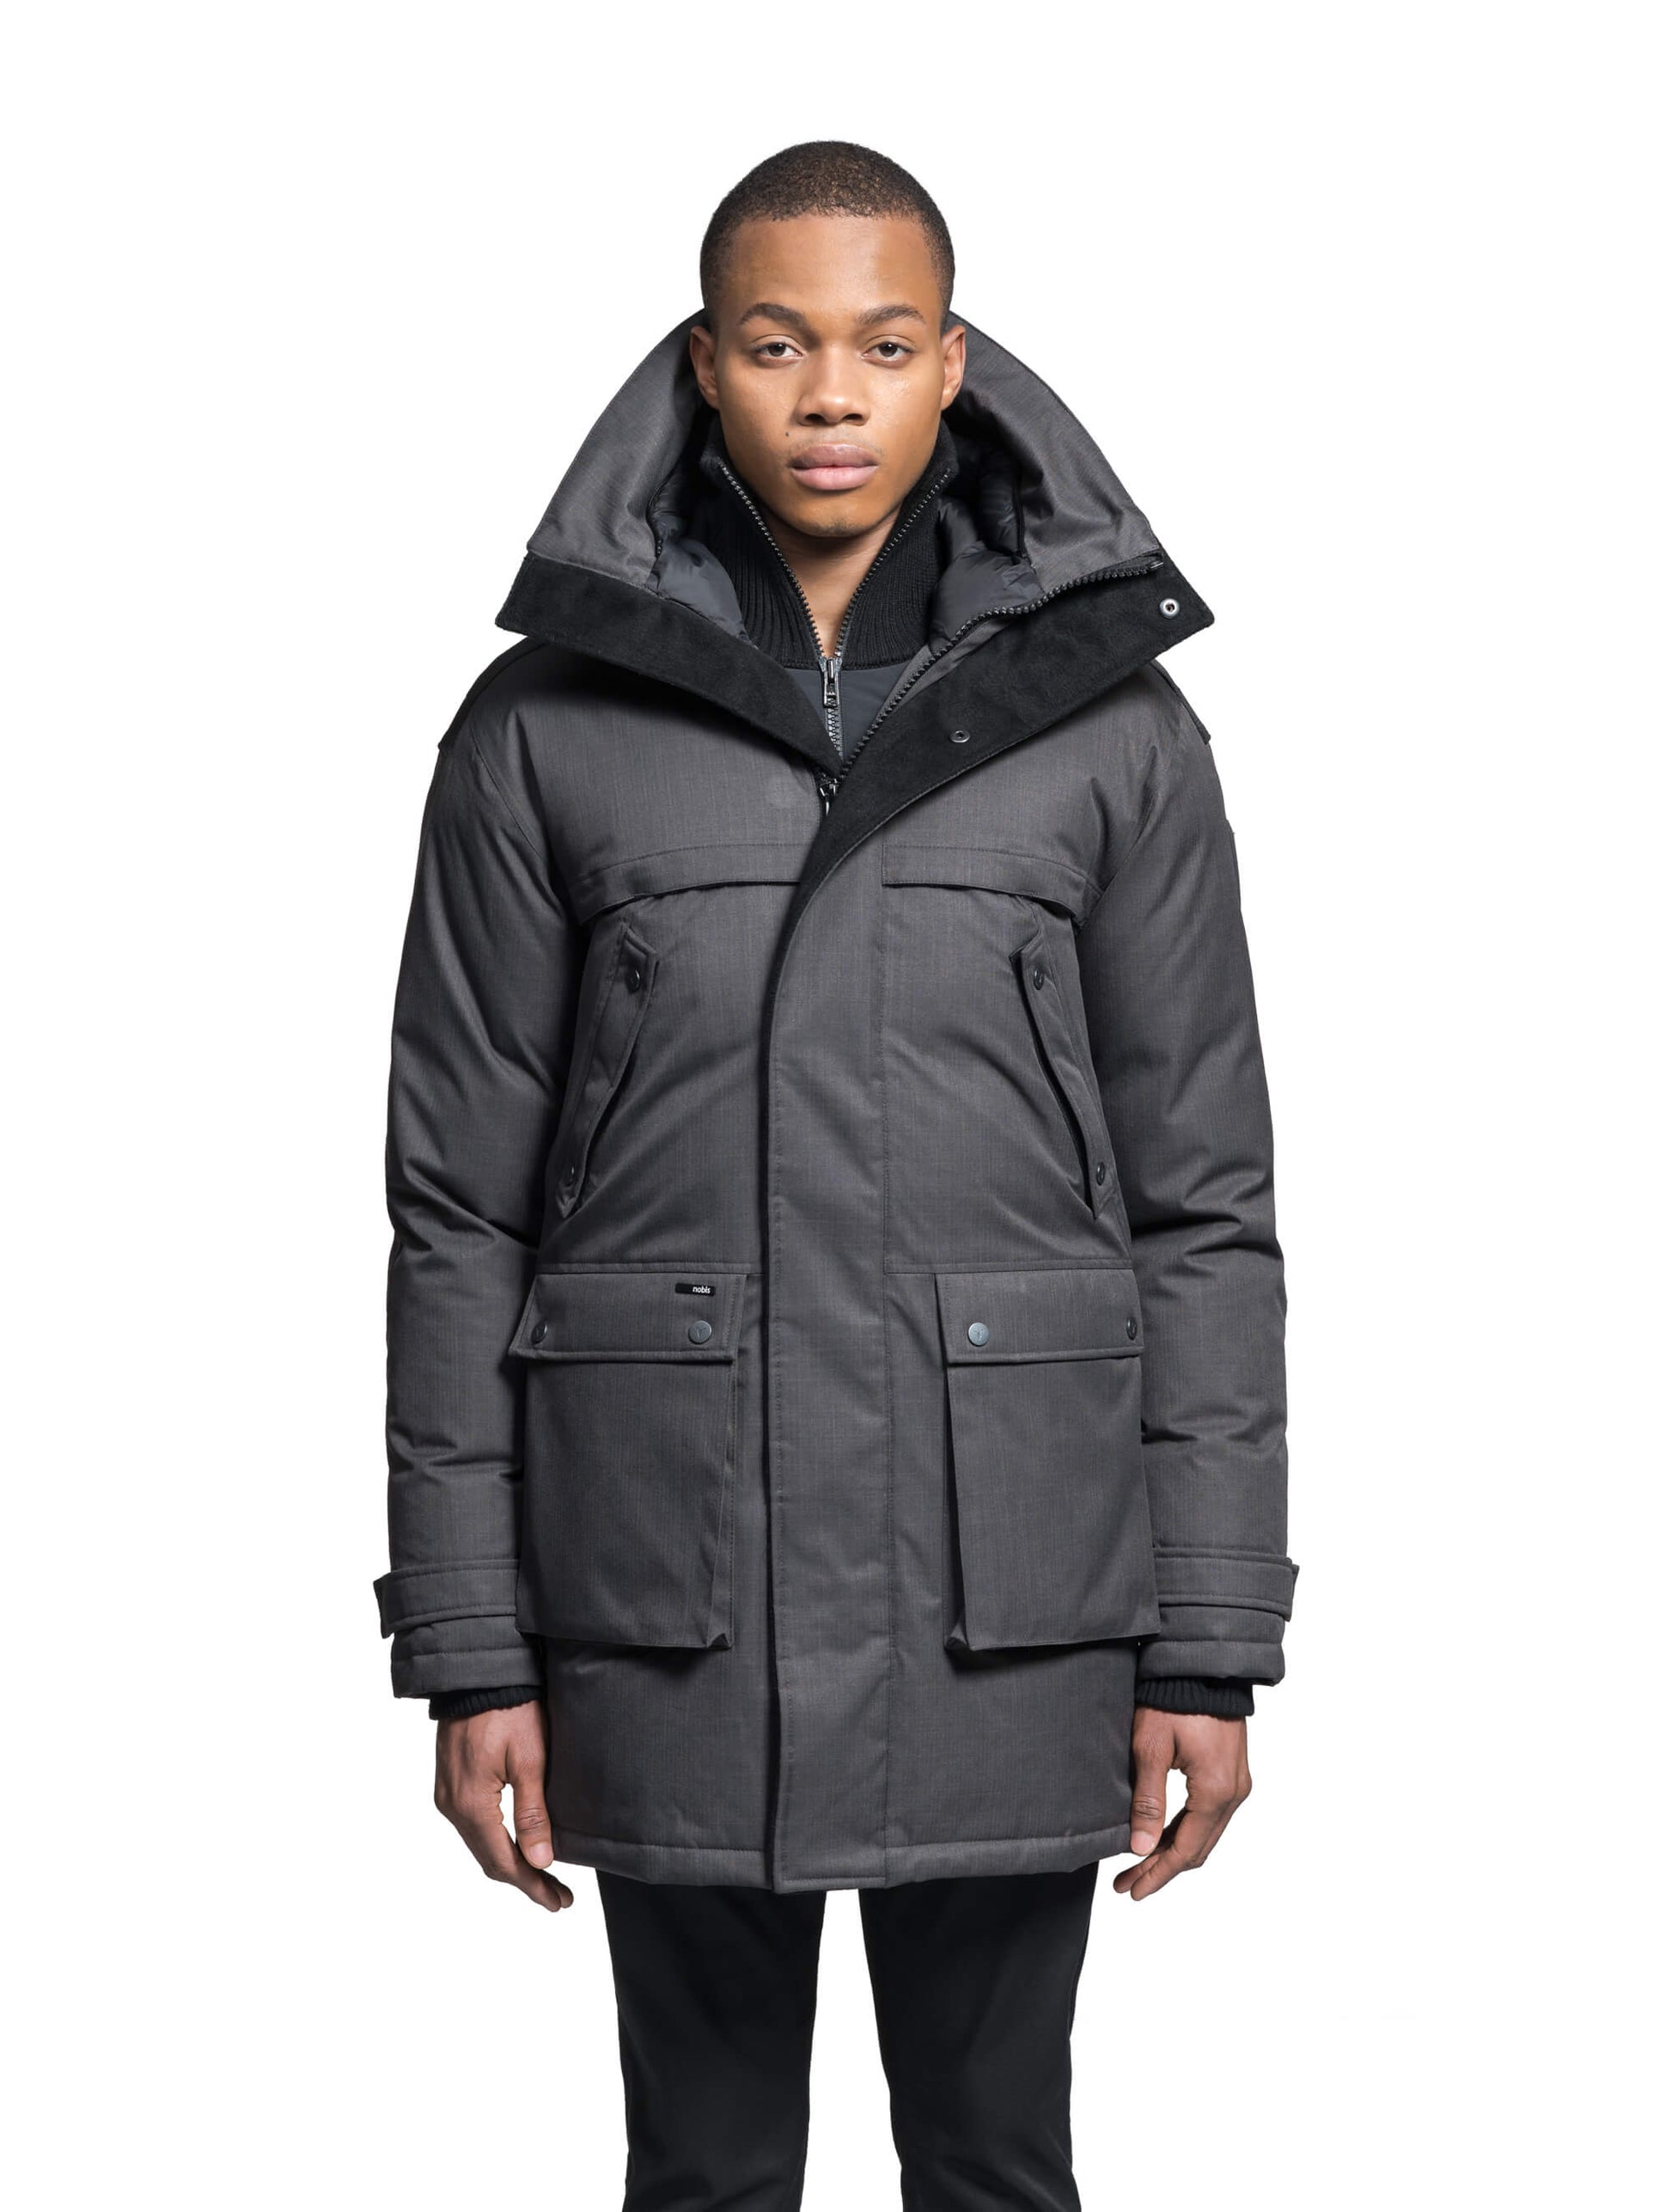 Men's Best Selling Parka the Yatesy is a down filled jacket with a zipper closure and magnetic placket in Steel Grey